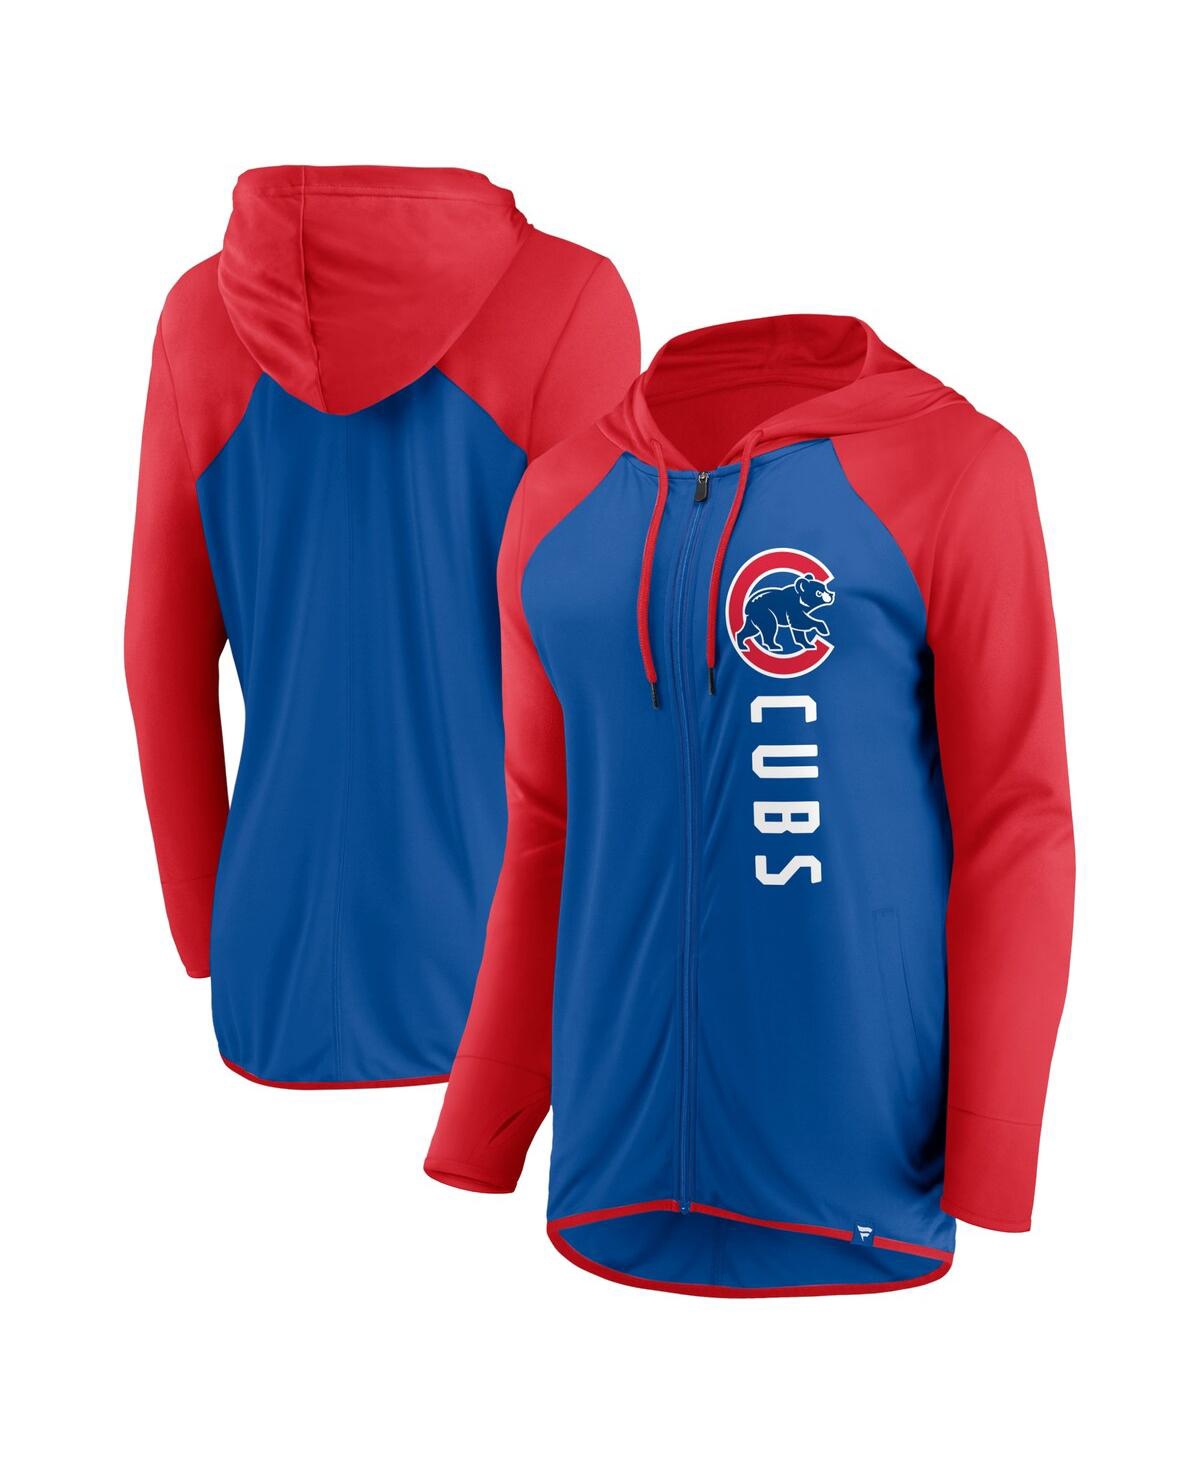 Women's Fanatics Royal, Red Chicago Cubs Forever Fan Full-Zip Hoodie Jacket - Royal, Red